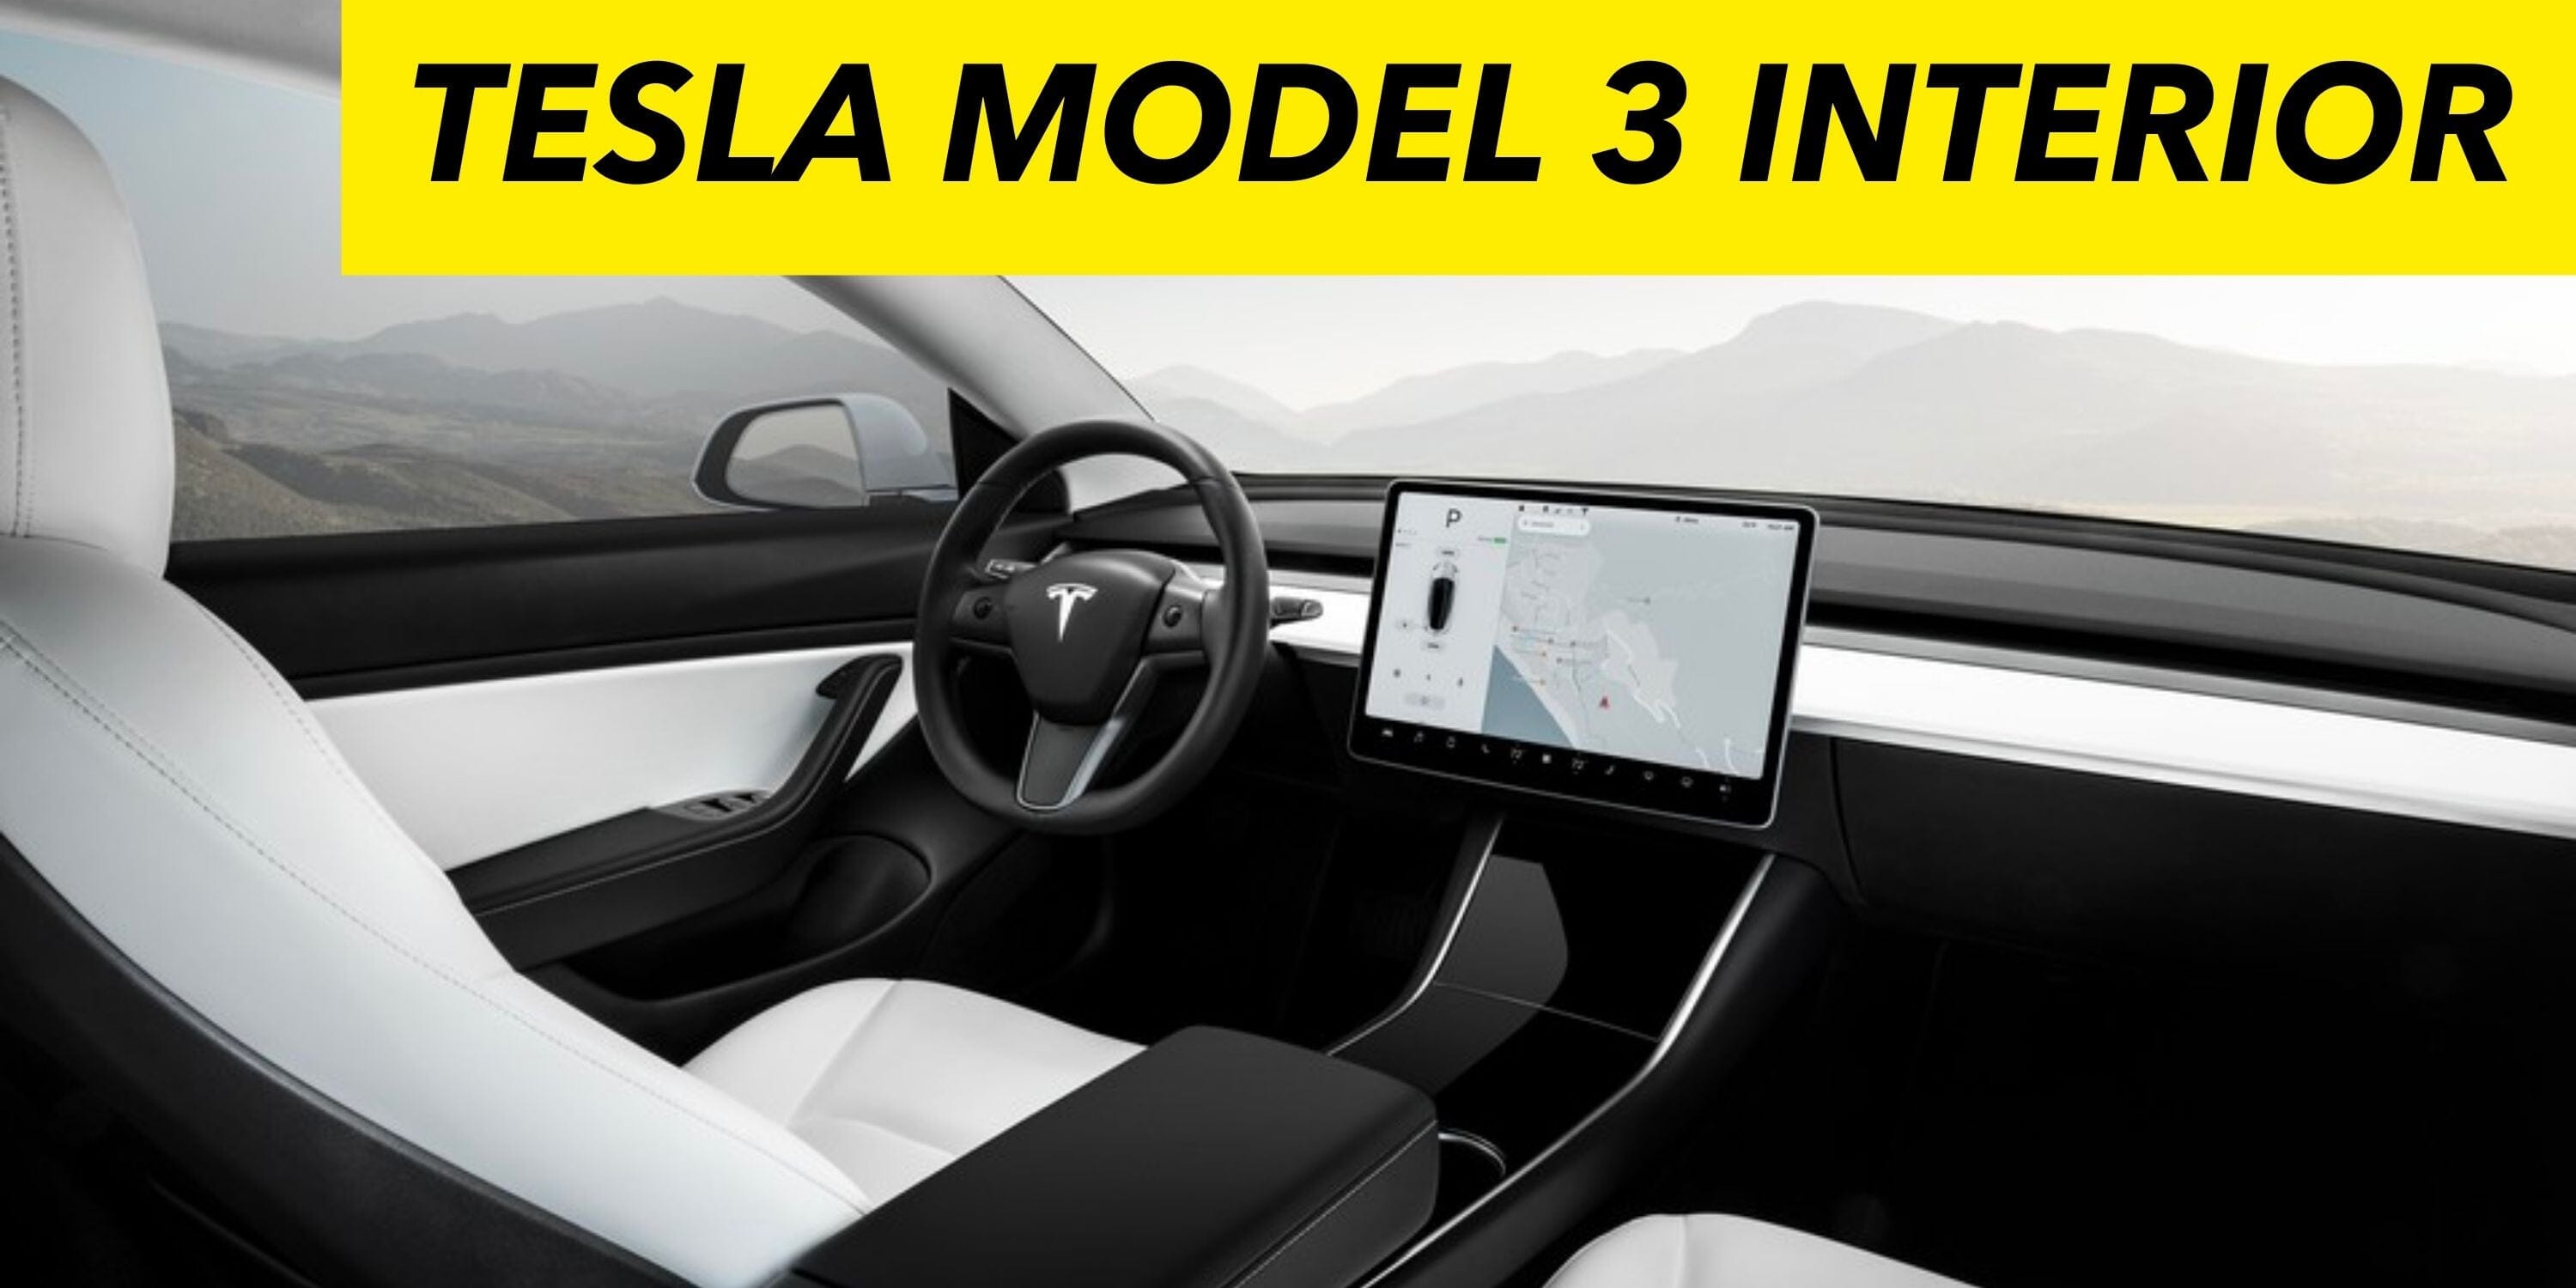 Tesla Model 3 Interior What it's like on the inside